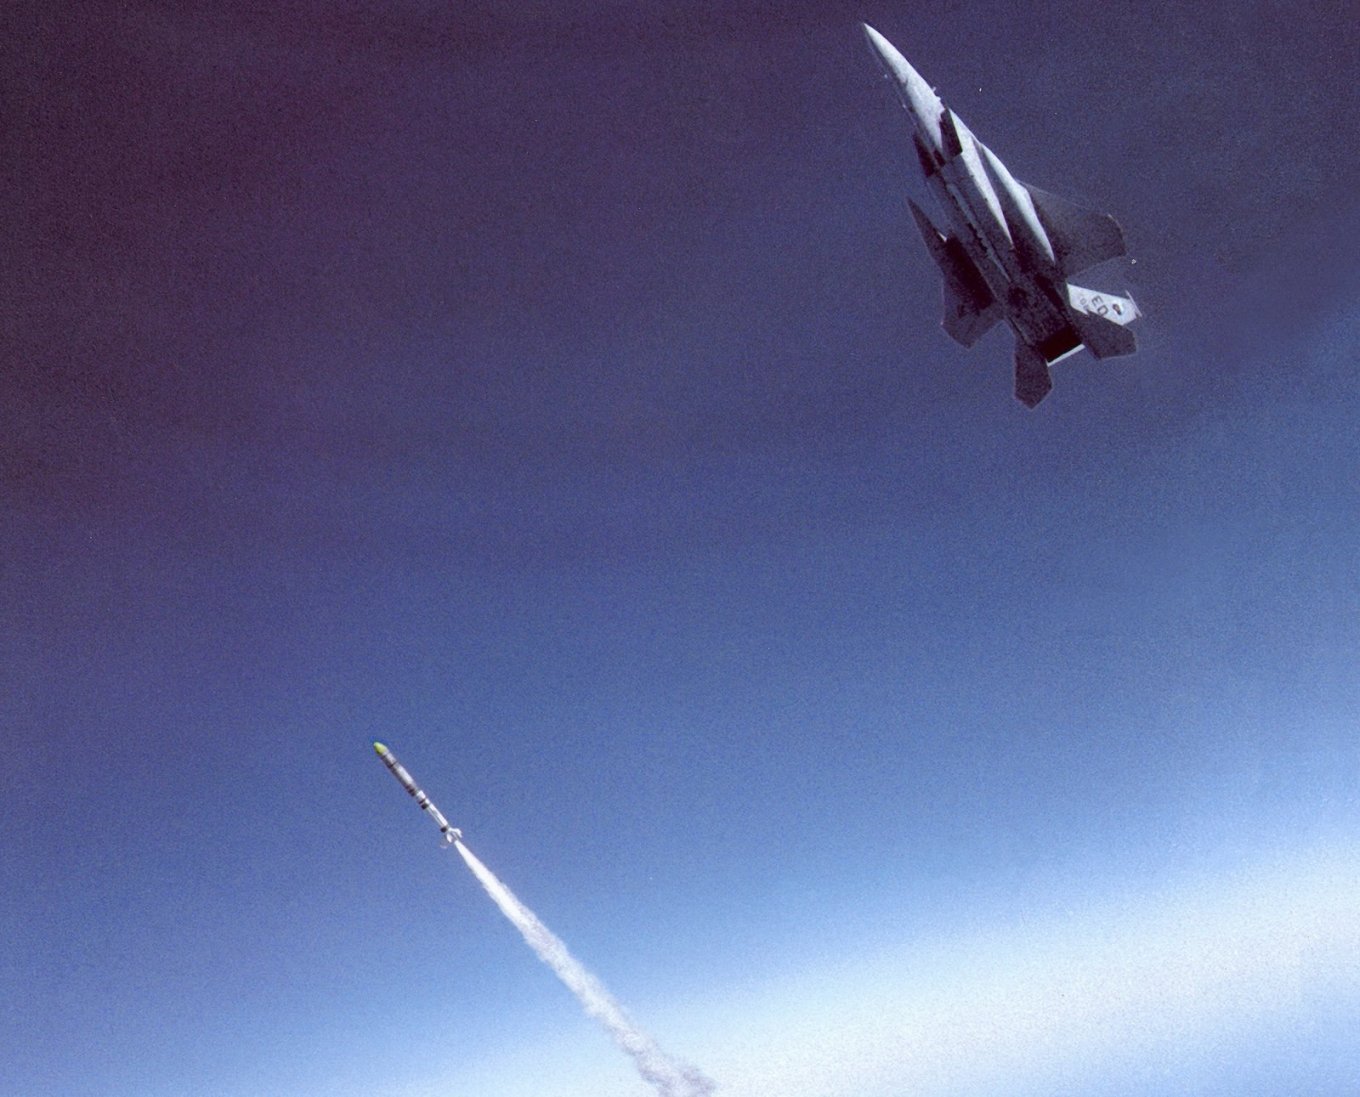 ASM-135 ASAT missile launch from an F-15 fighter jet